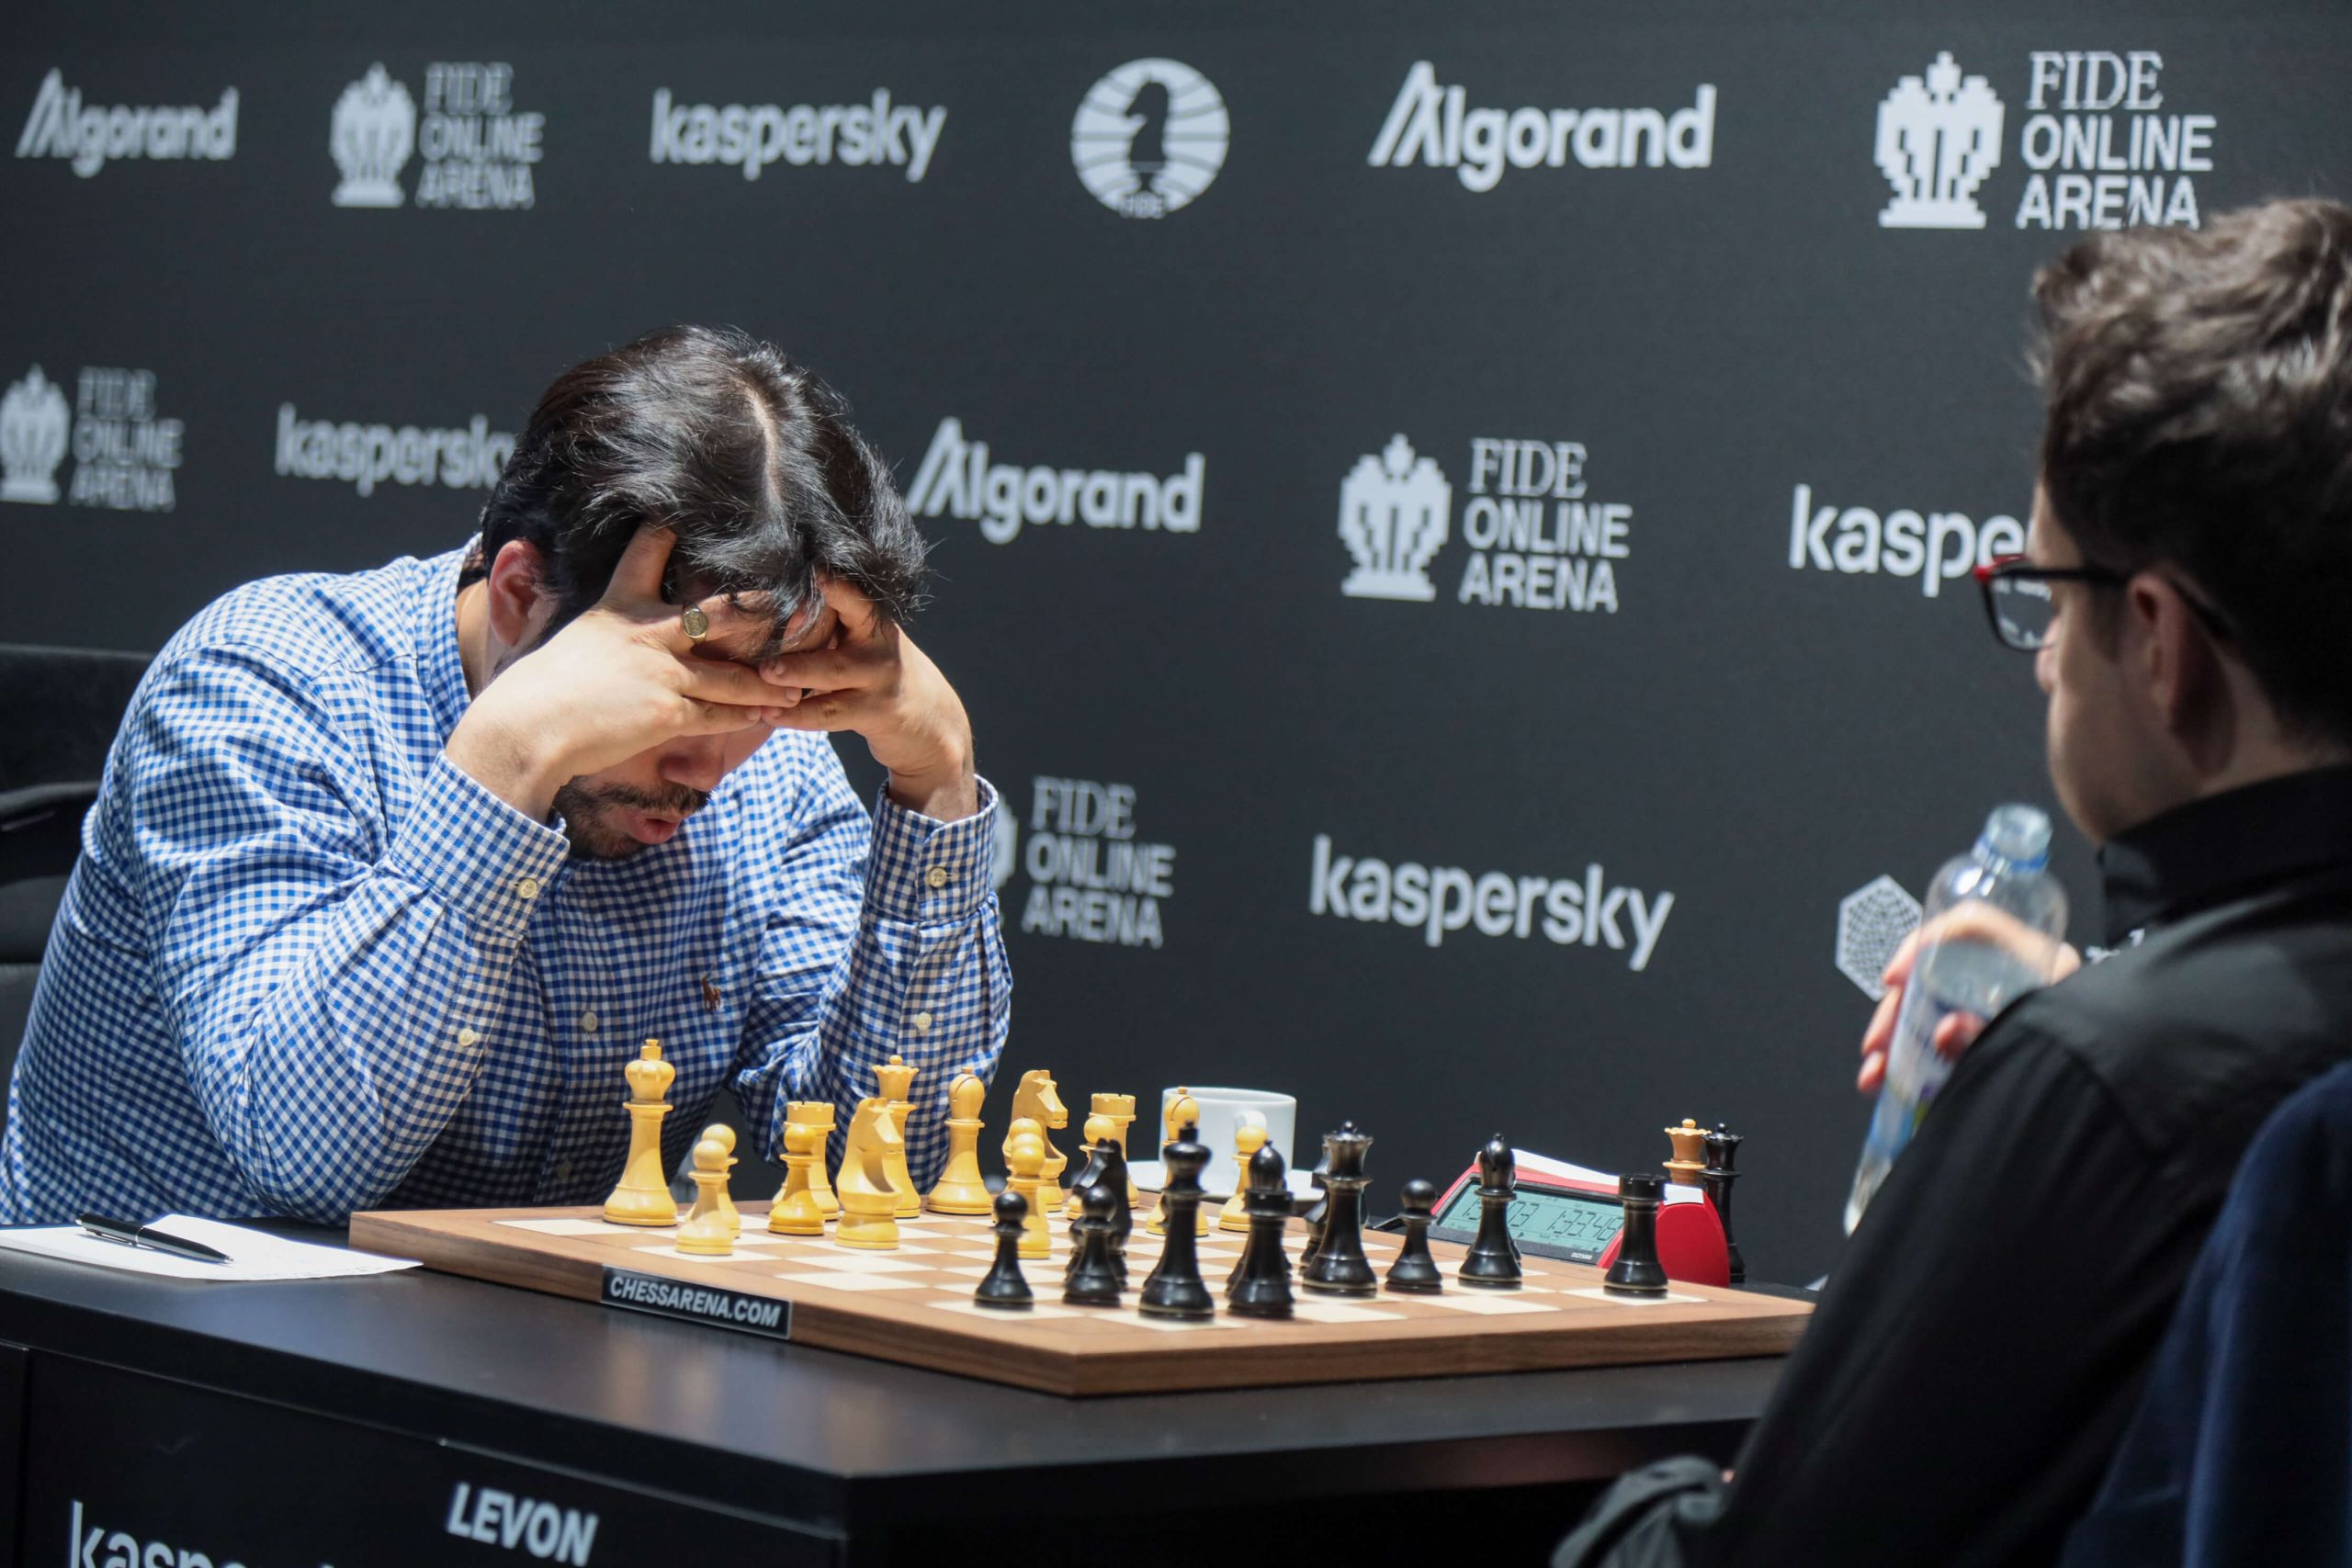 FIDE Grand Prix: Nakamura joins Aronian in semifinals